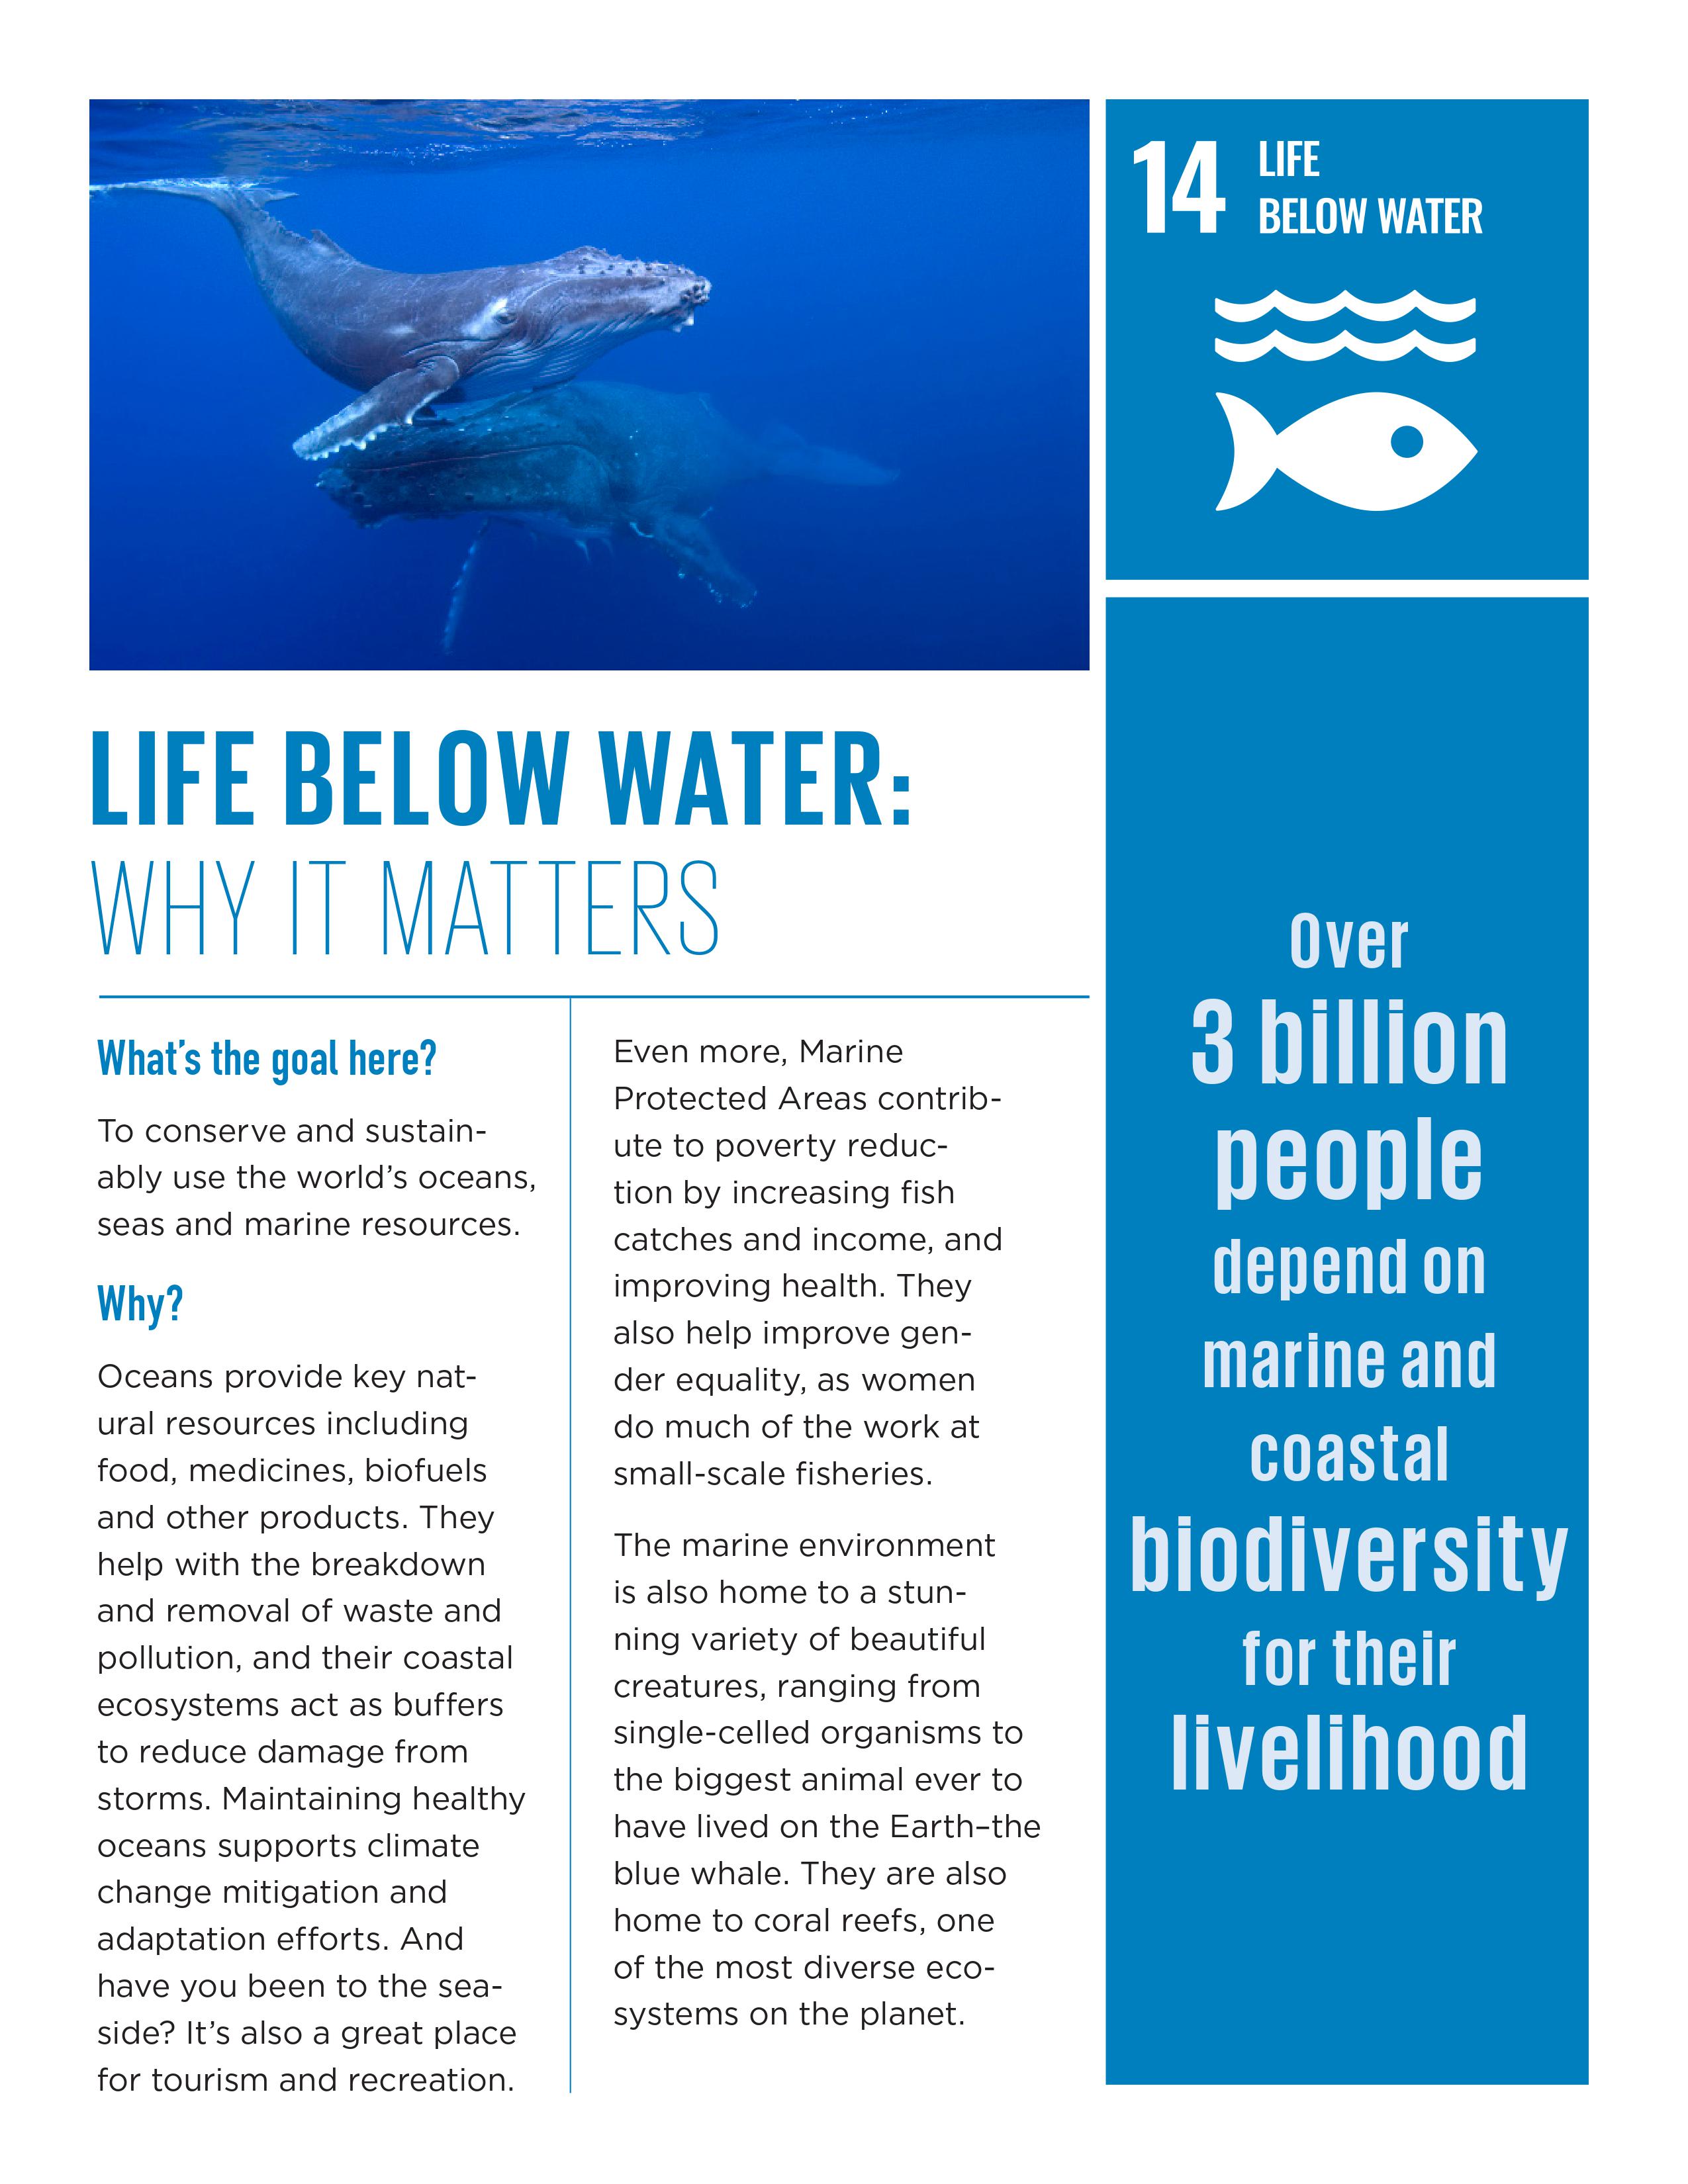 Life Below Water: Why it Matters - CLME+ HUB